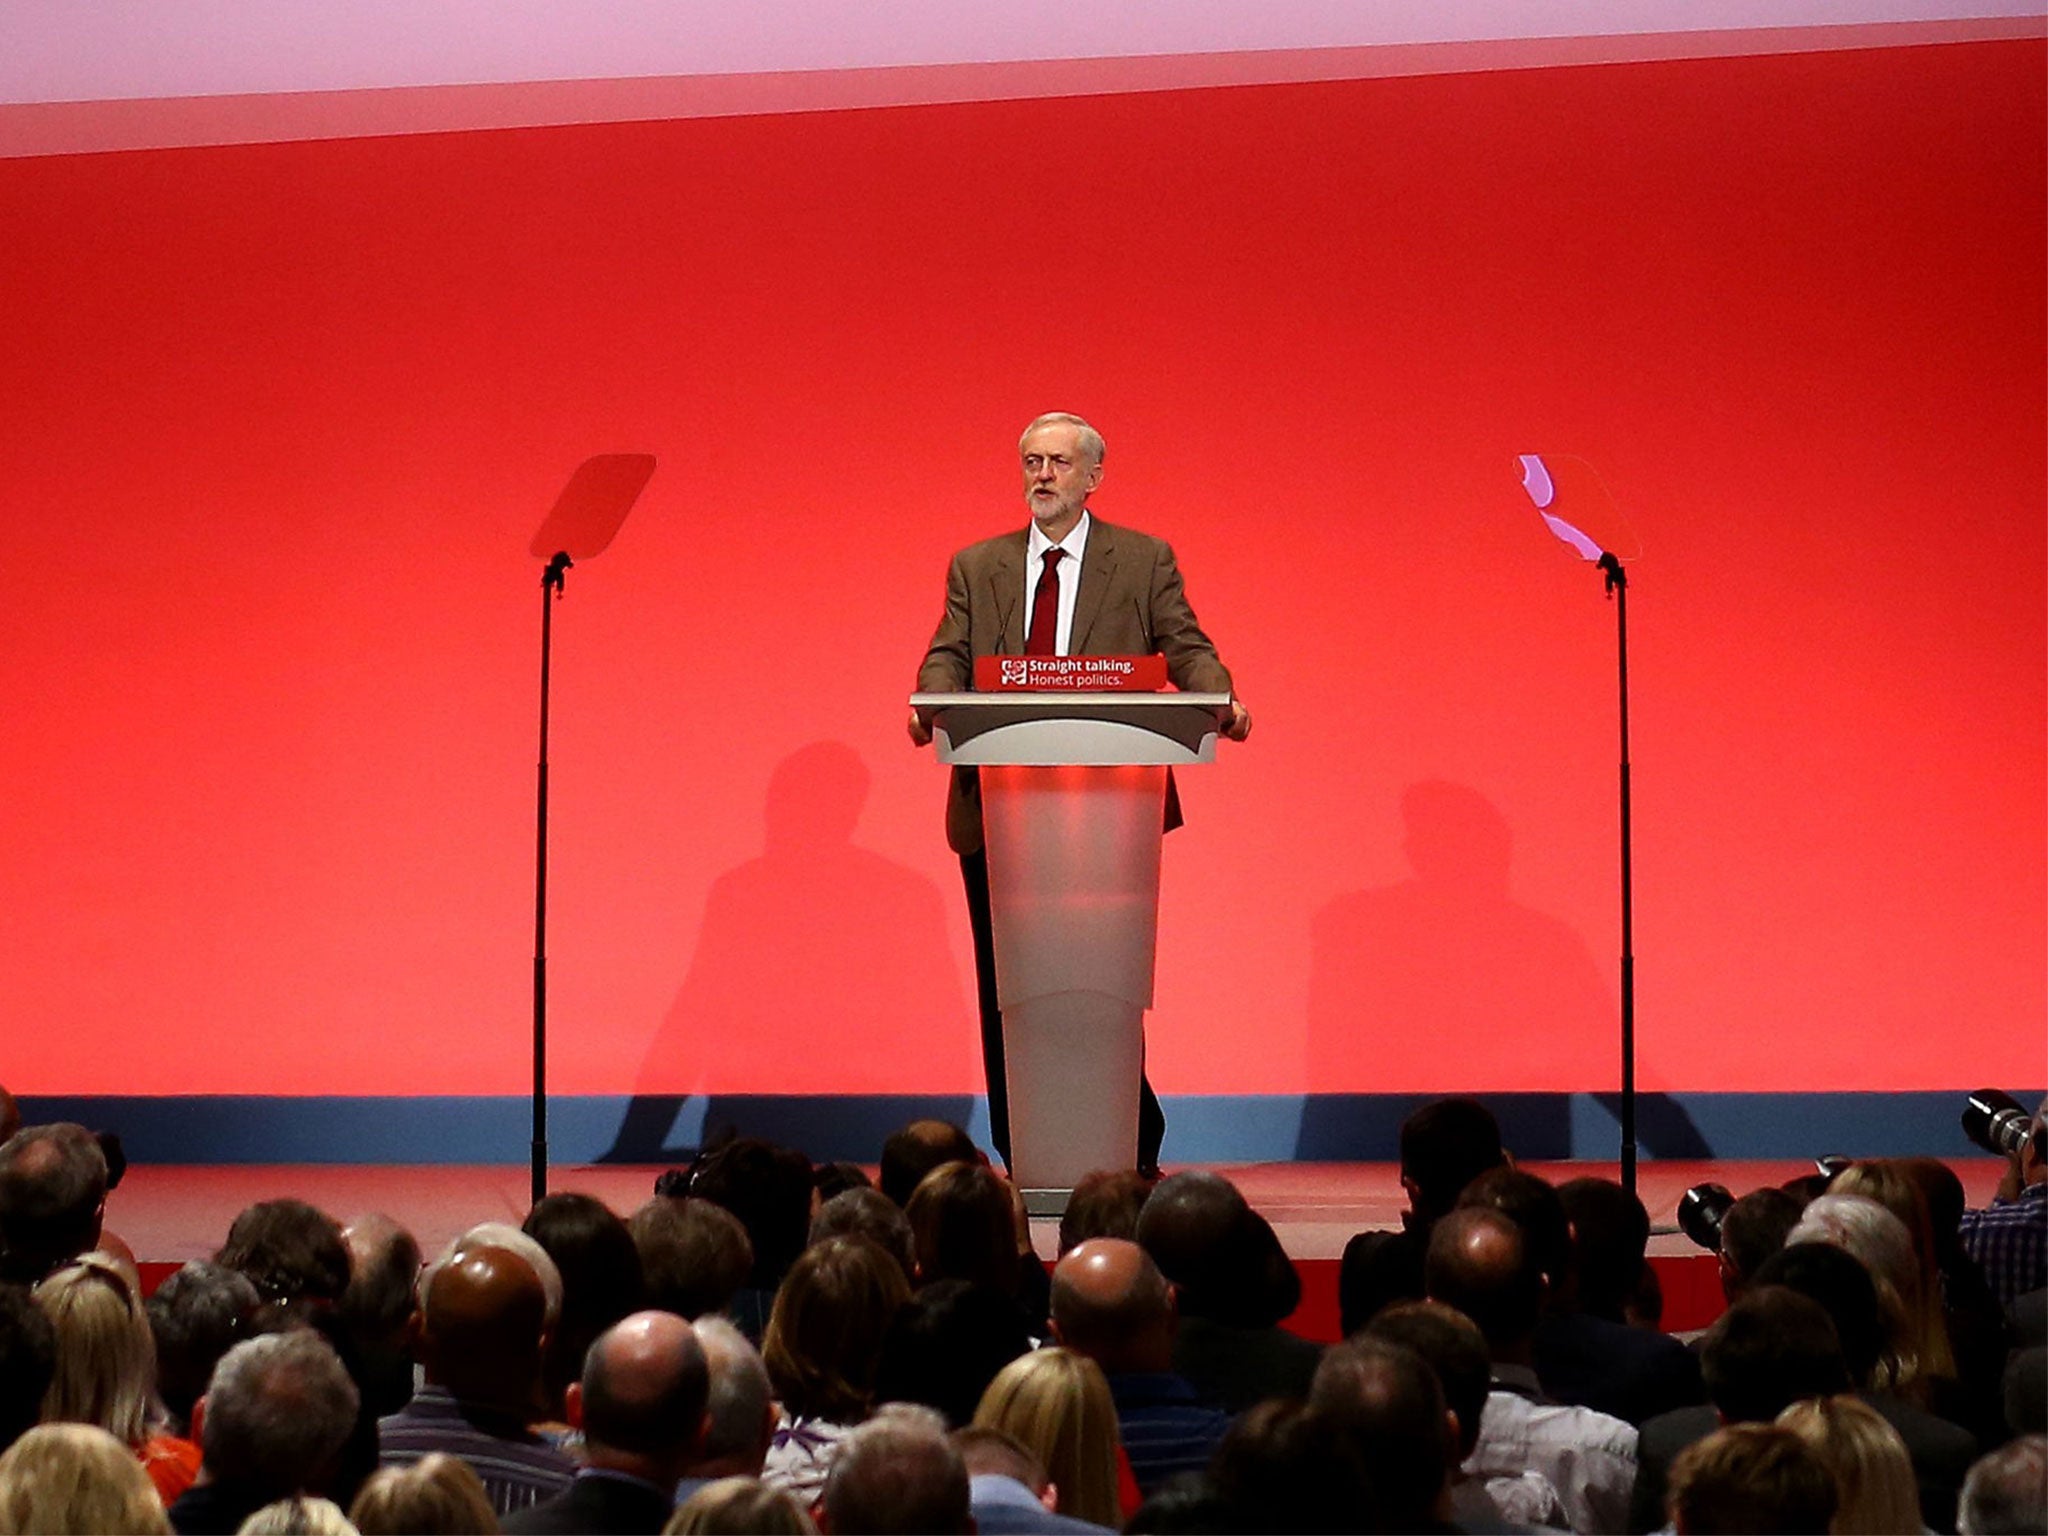 Jeremy Corbyn says it was not 'copying someone's homework' to borrow segments of his speech